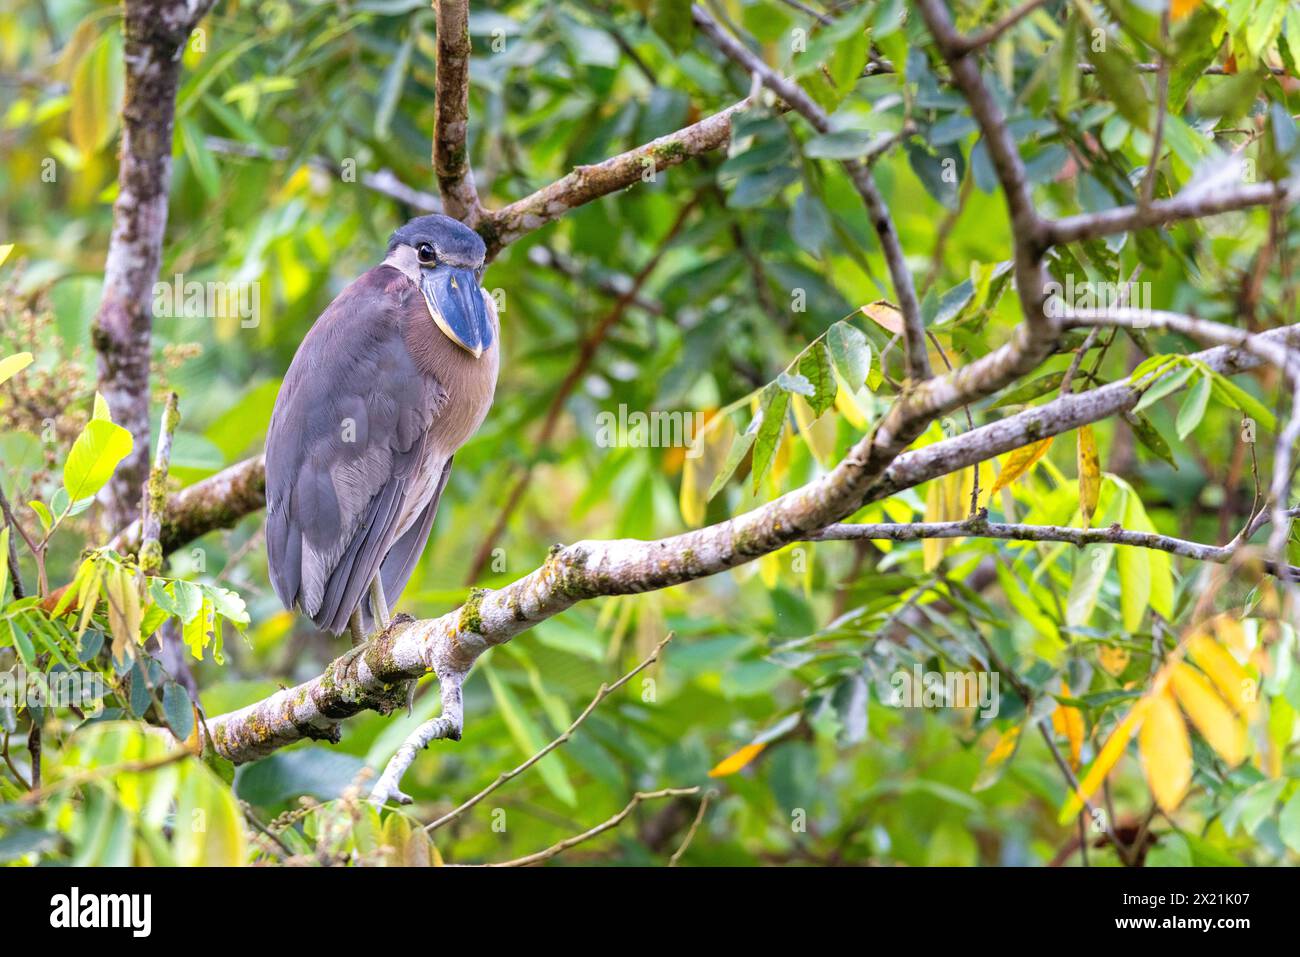 Boat-billed heron, boatbill (Cochlearius cochlearius), stands on a branch in the floodplain forest, Costa Rica, Cano Negro Stock Photo